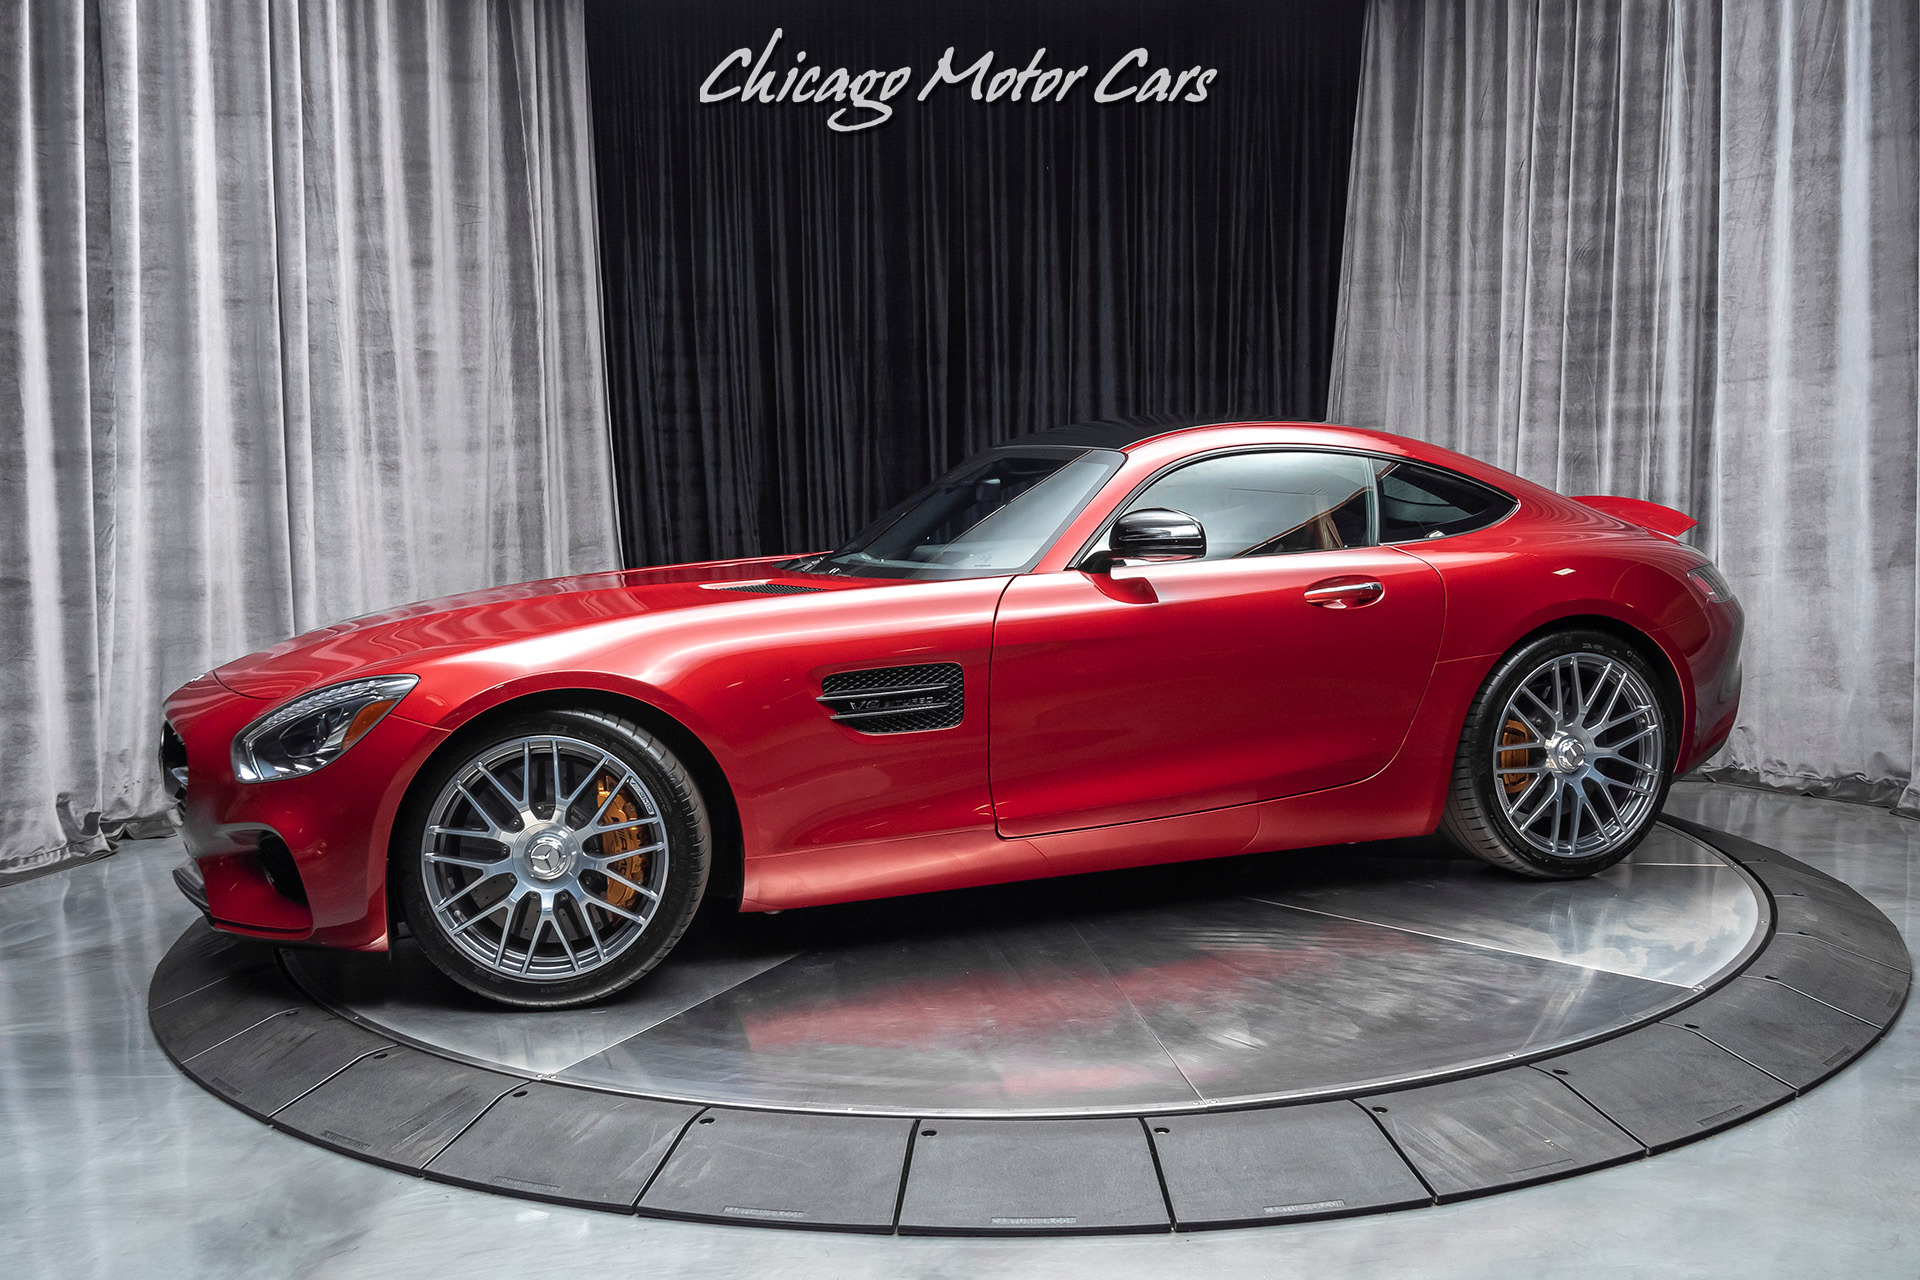 Used 2017 Mercedes Benz Amg Gt S Renntech R2 Carbon Ceramic K40 Only 14k Miles For Sale Special Pricing Chicago Motor Cars Stock 17390